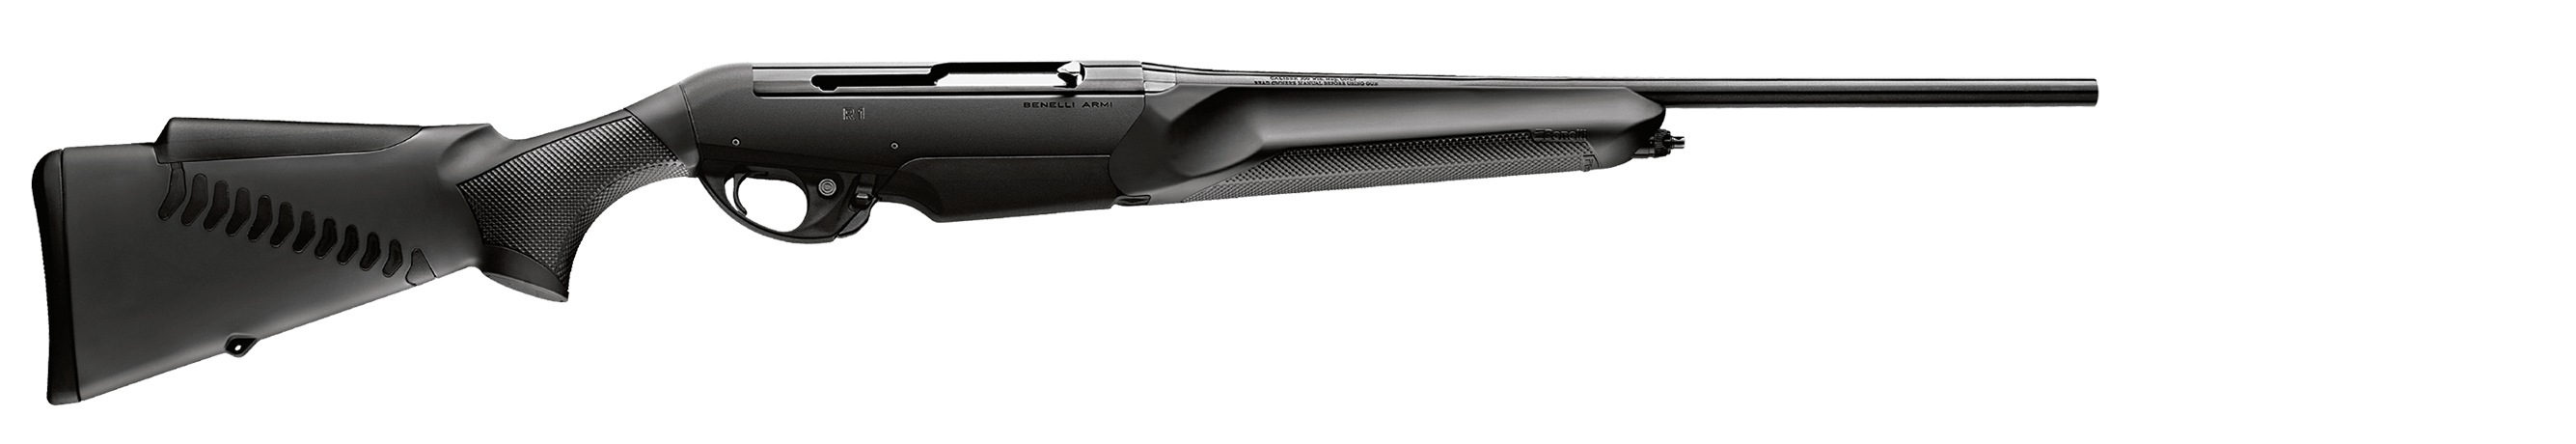 benelli-R1-comfortech.png